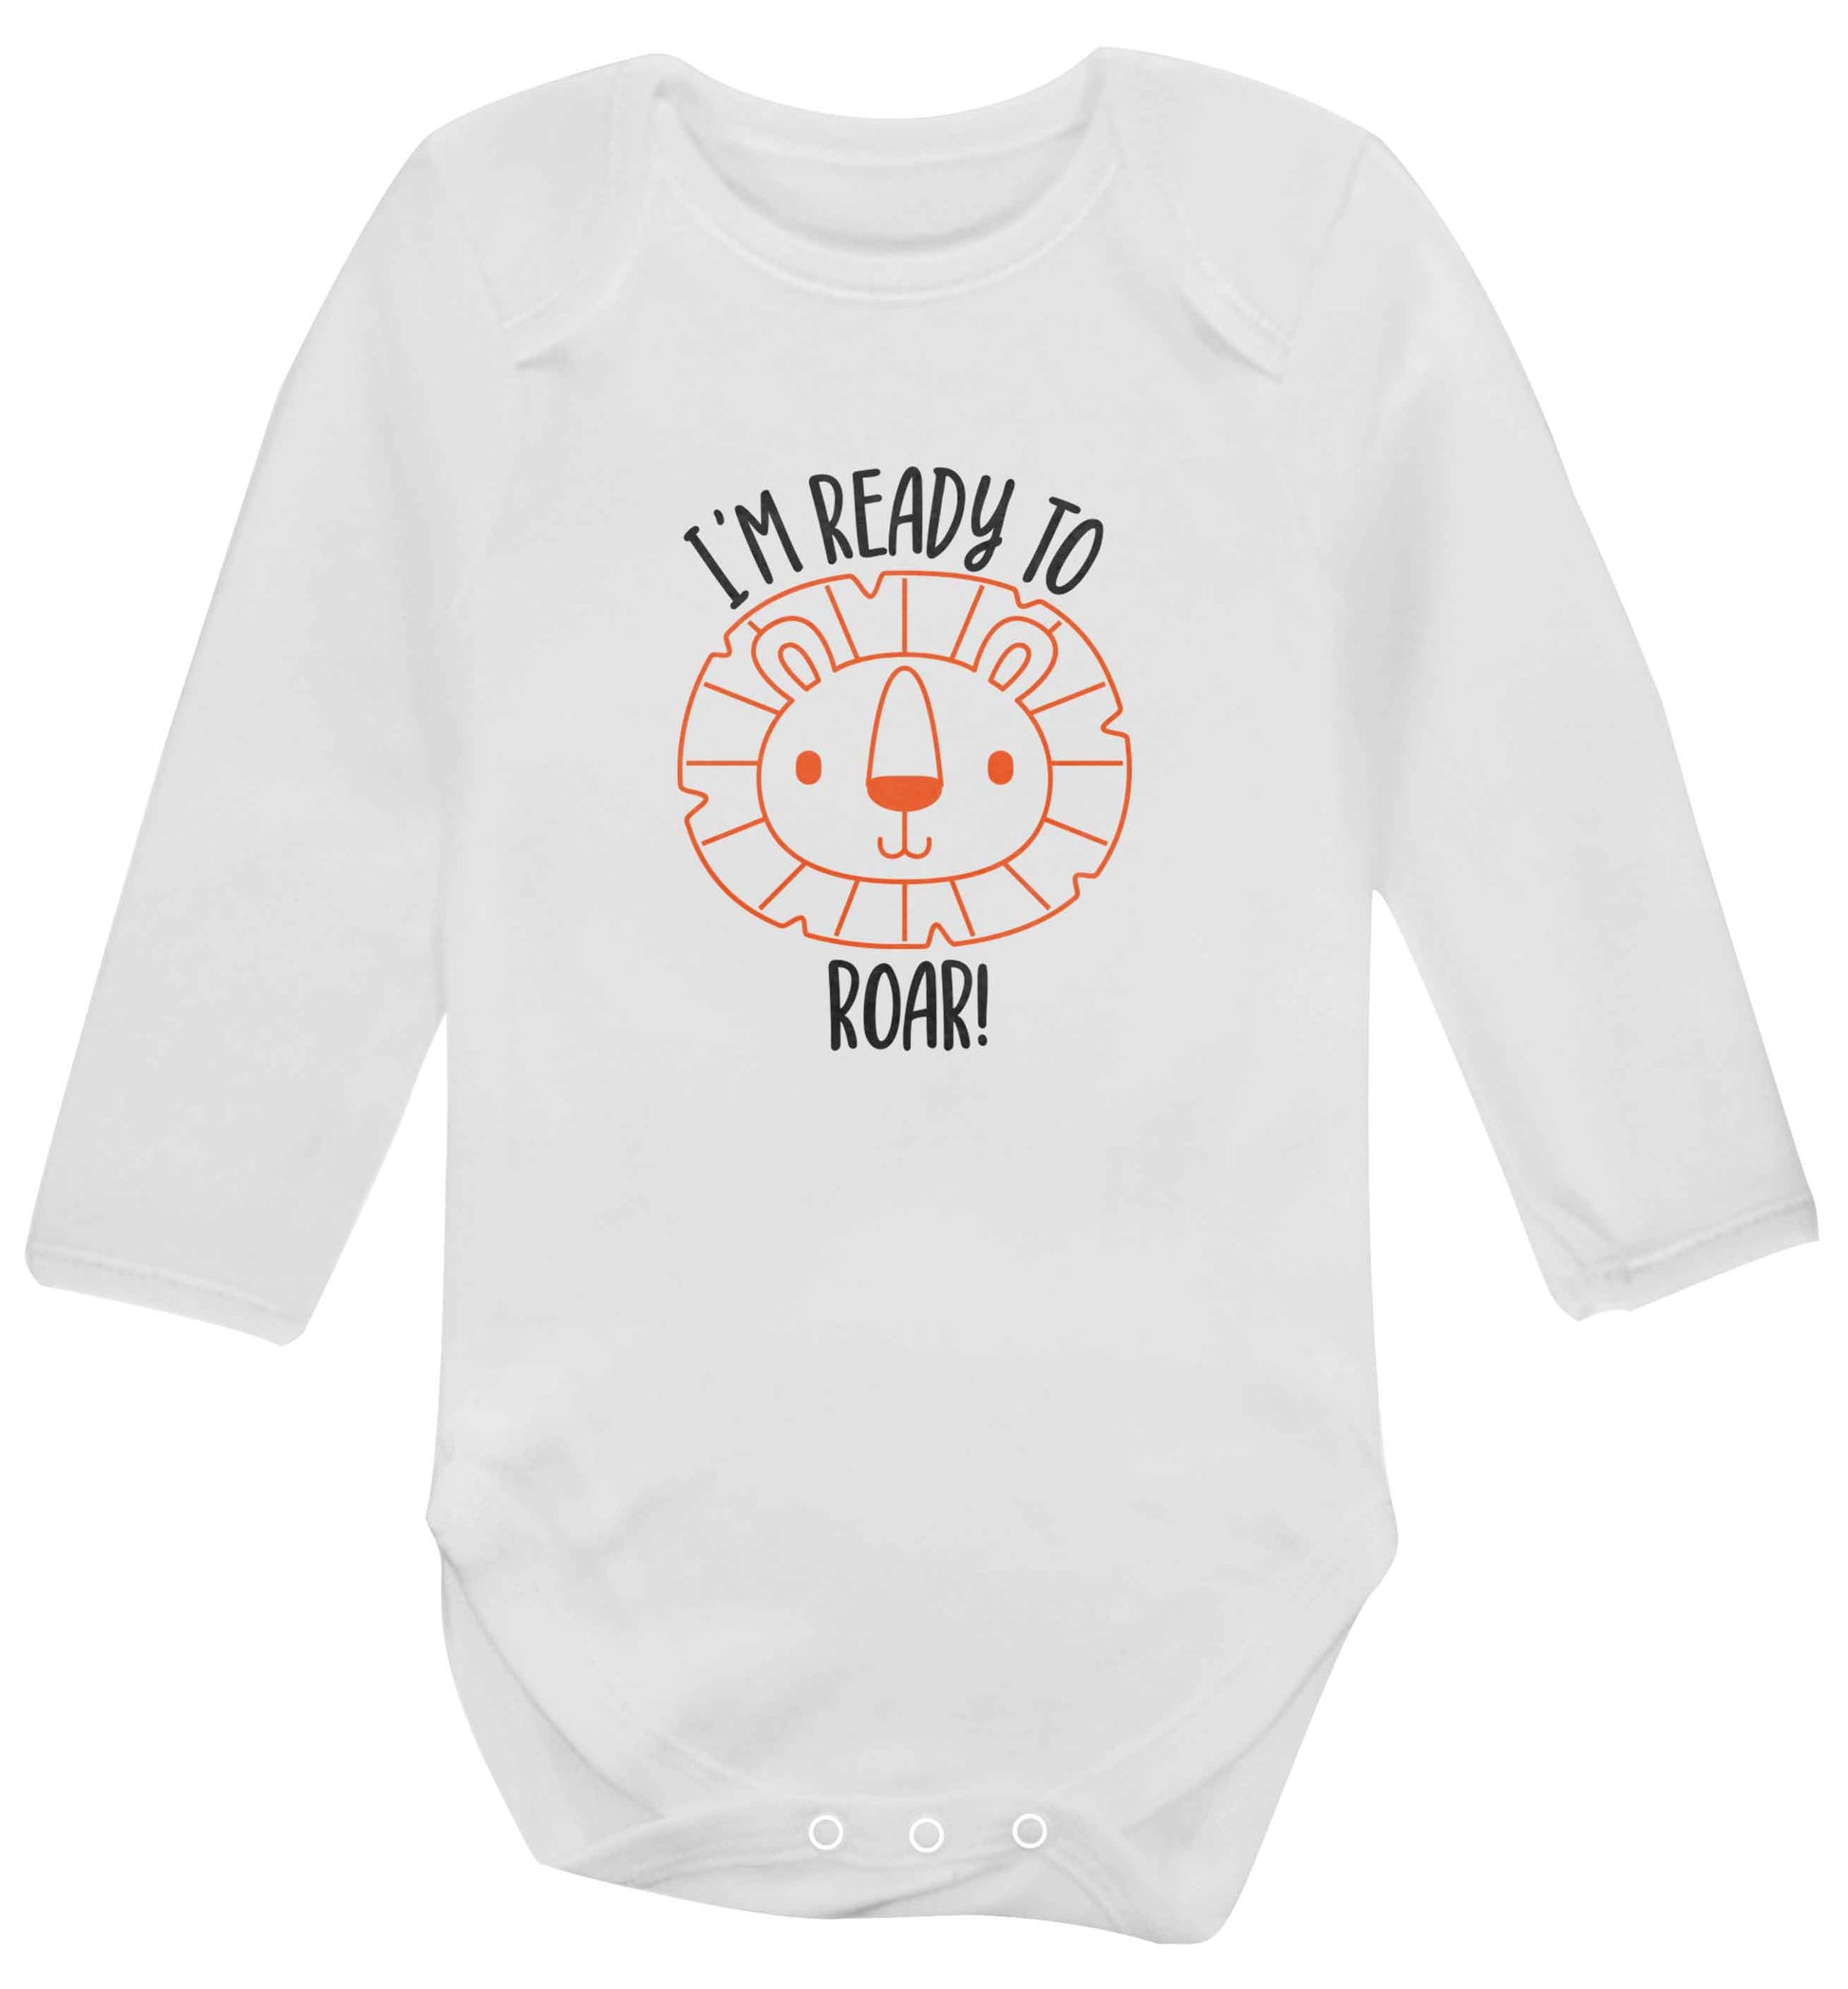 I'm ready to rawr baby vest long sleeved white 6-12 months